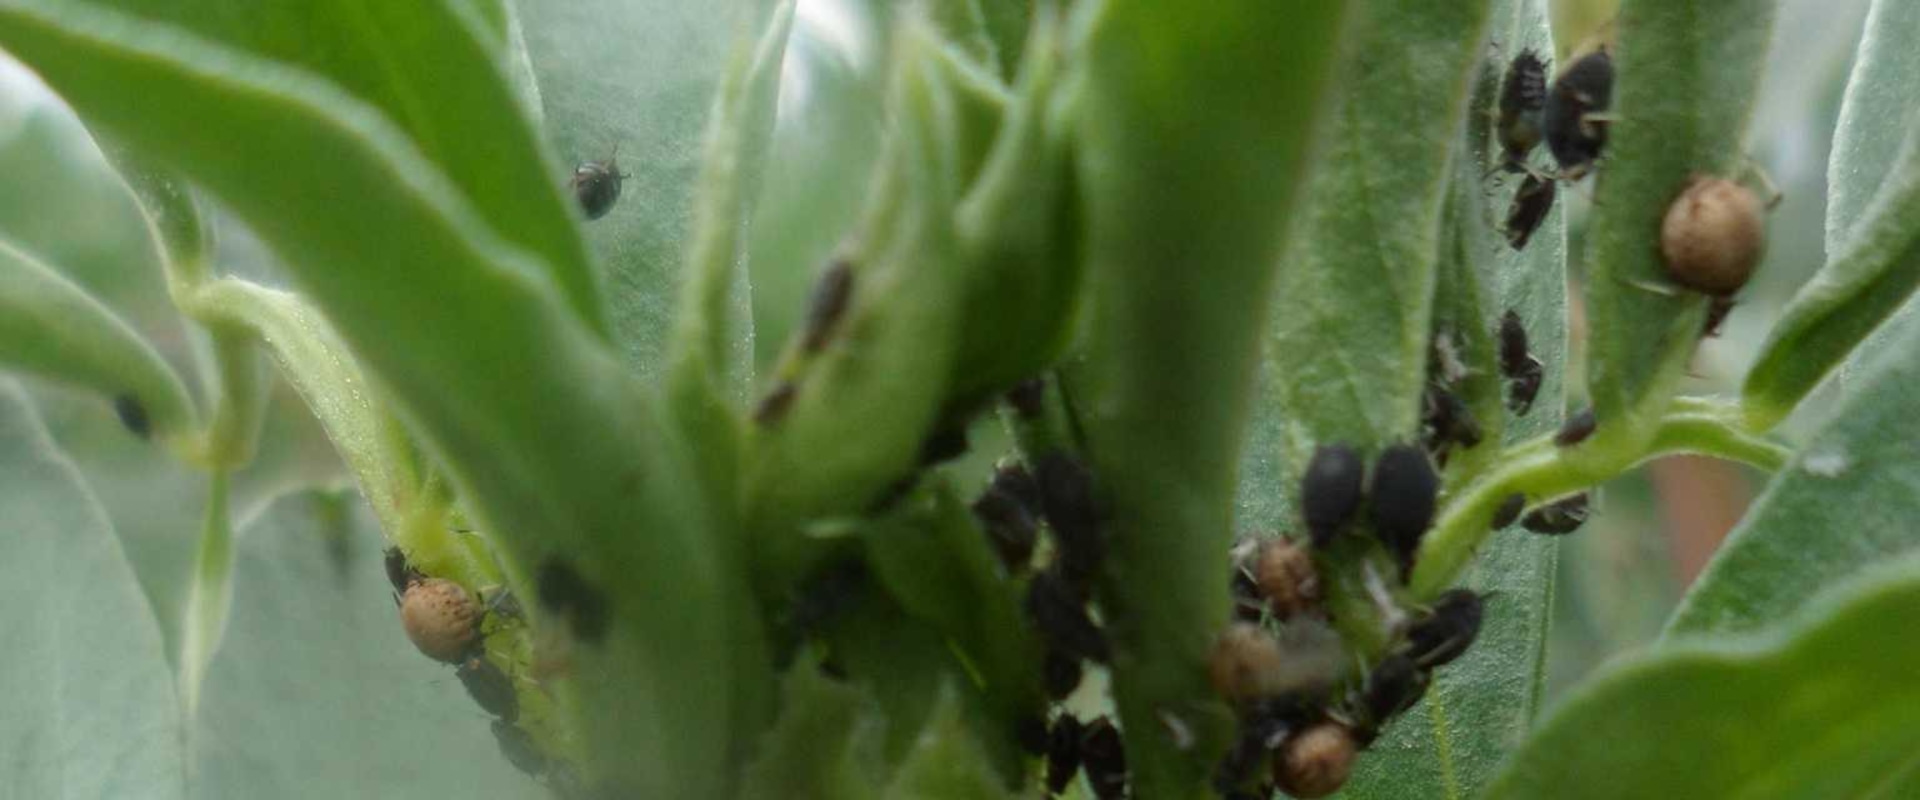 Common Pests and Diseases for Herbs Grown in Travis County, Texas